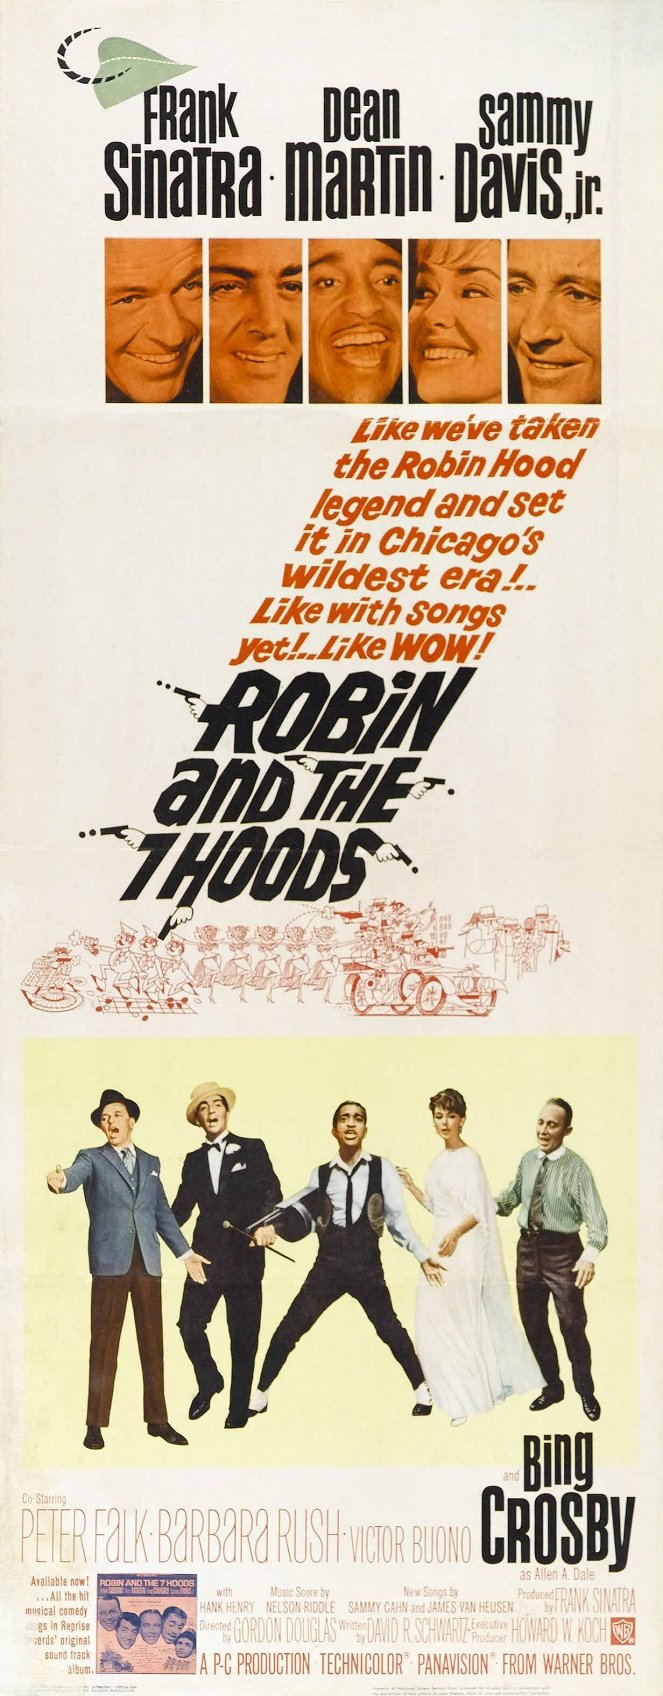 Robin and the 7 Hoods - Cartazes